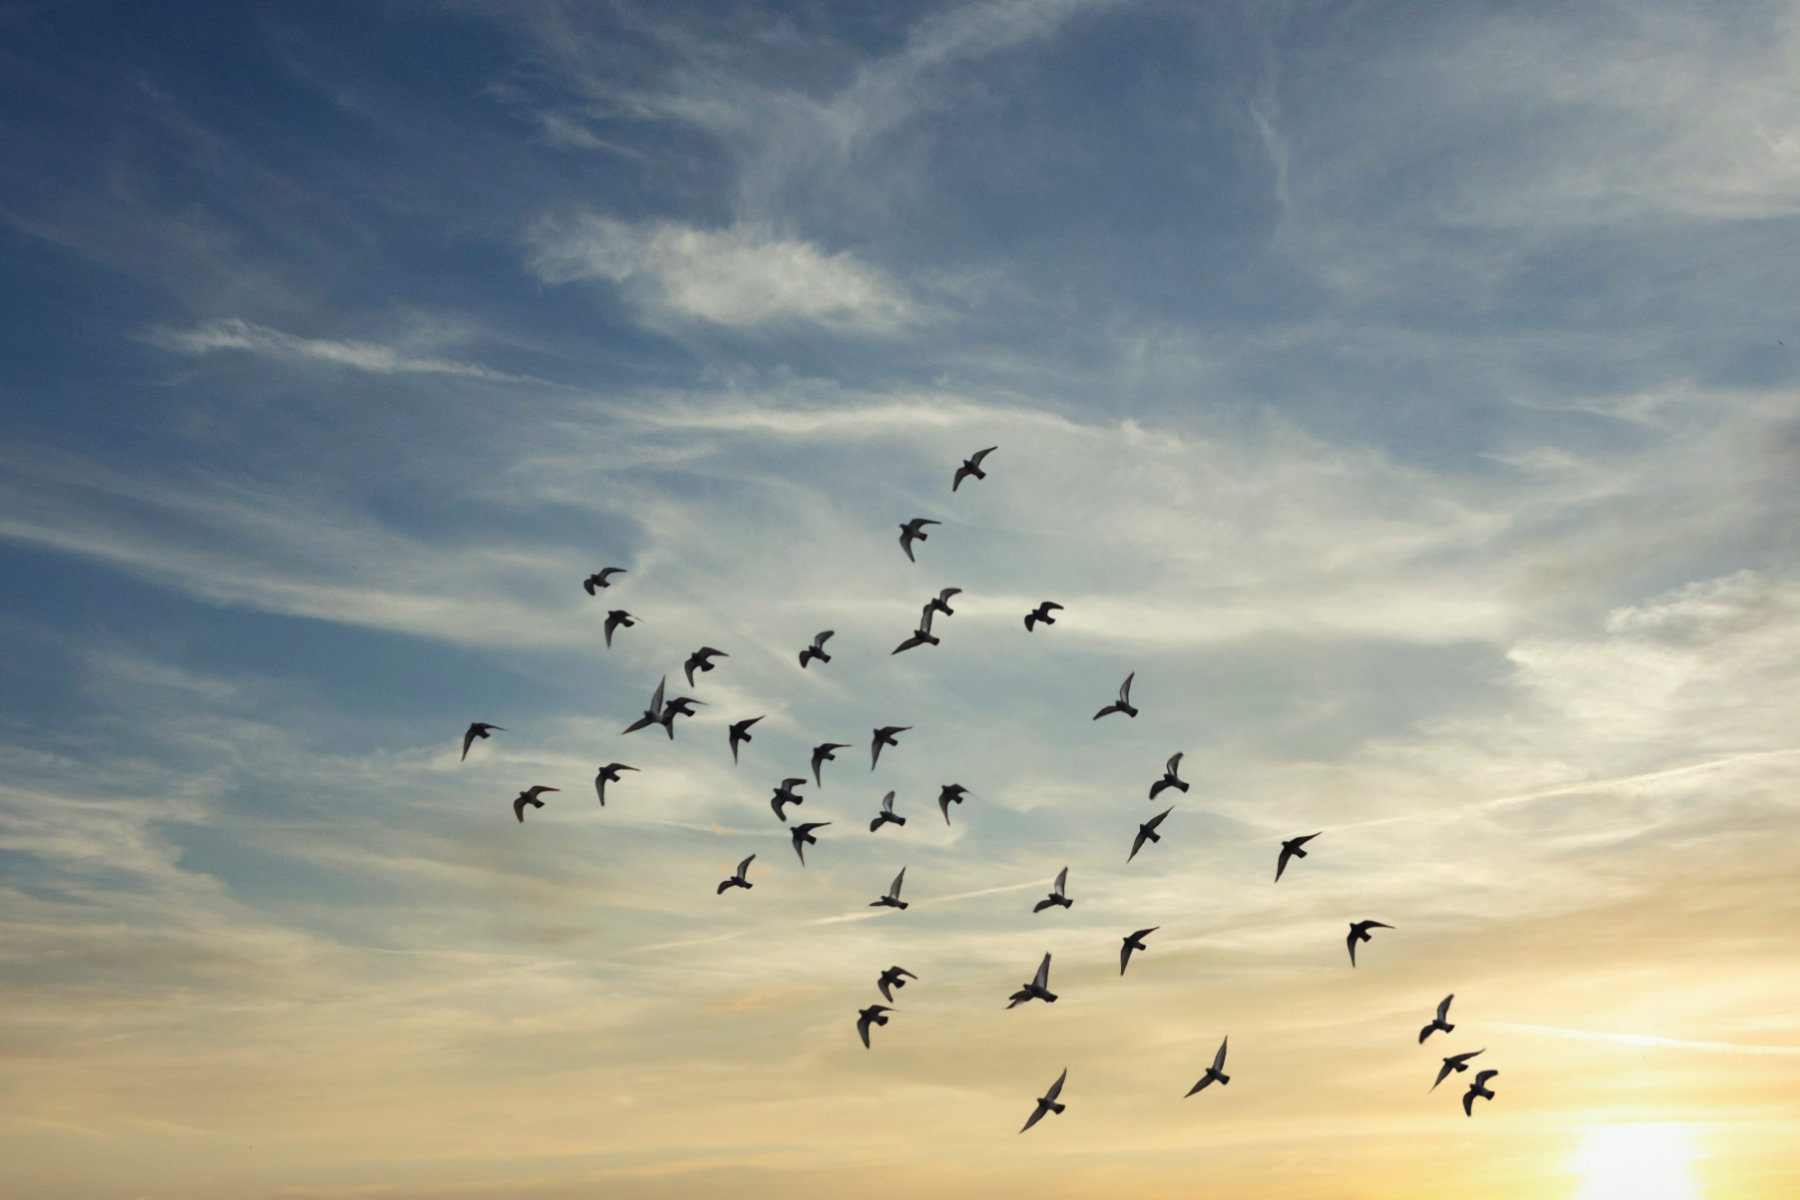 Flock of birds flying in the sky at sunset